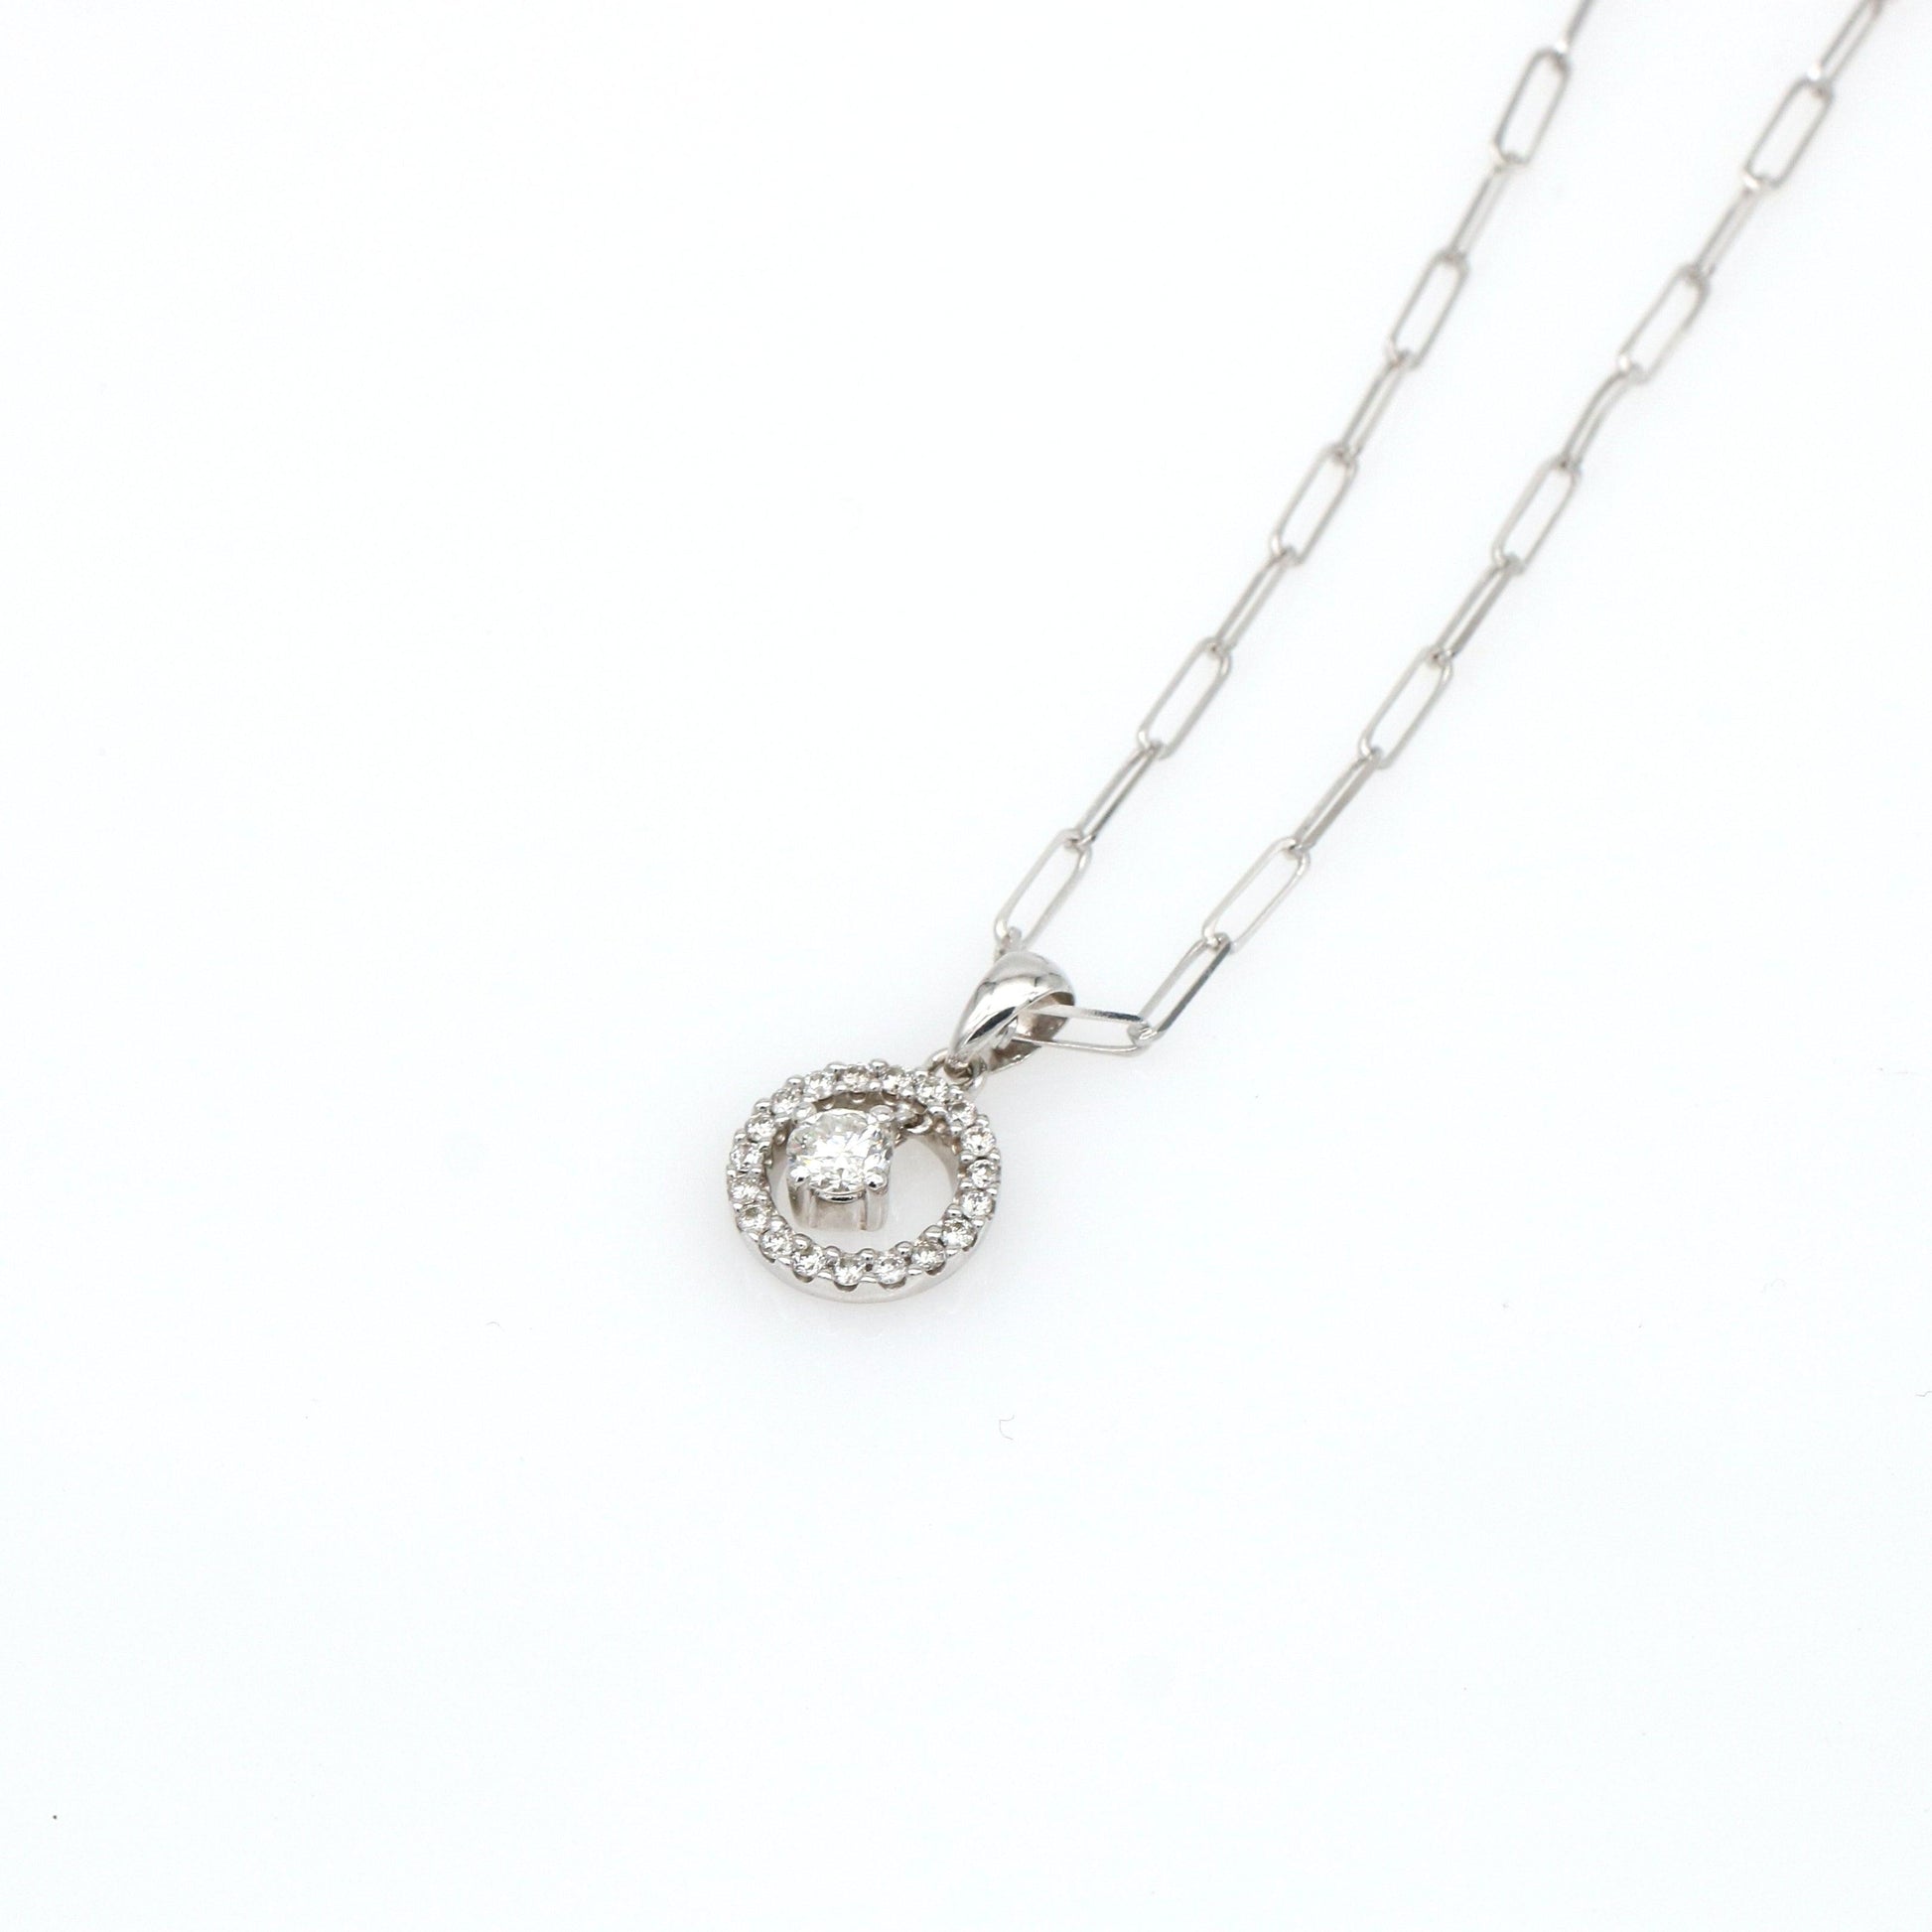 Diamond Round Dangling Pendant on Paperclip Chain in 14k White Gold 0.75 cttw - 31 Jewels Inc.